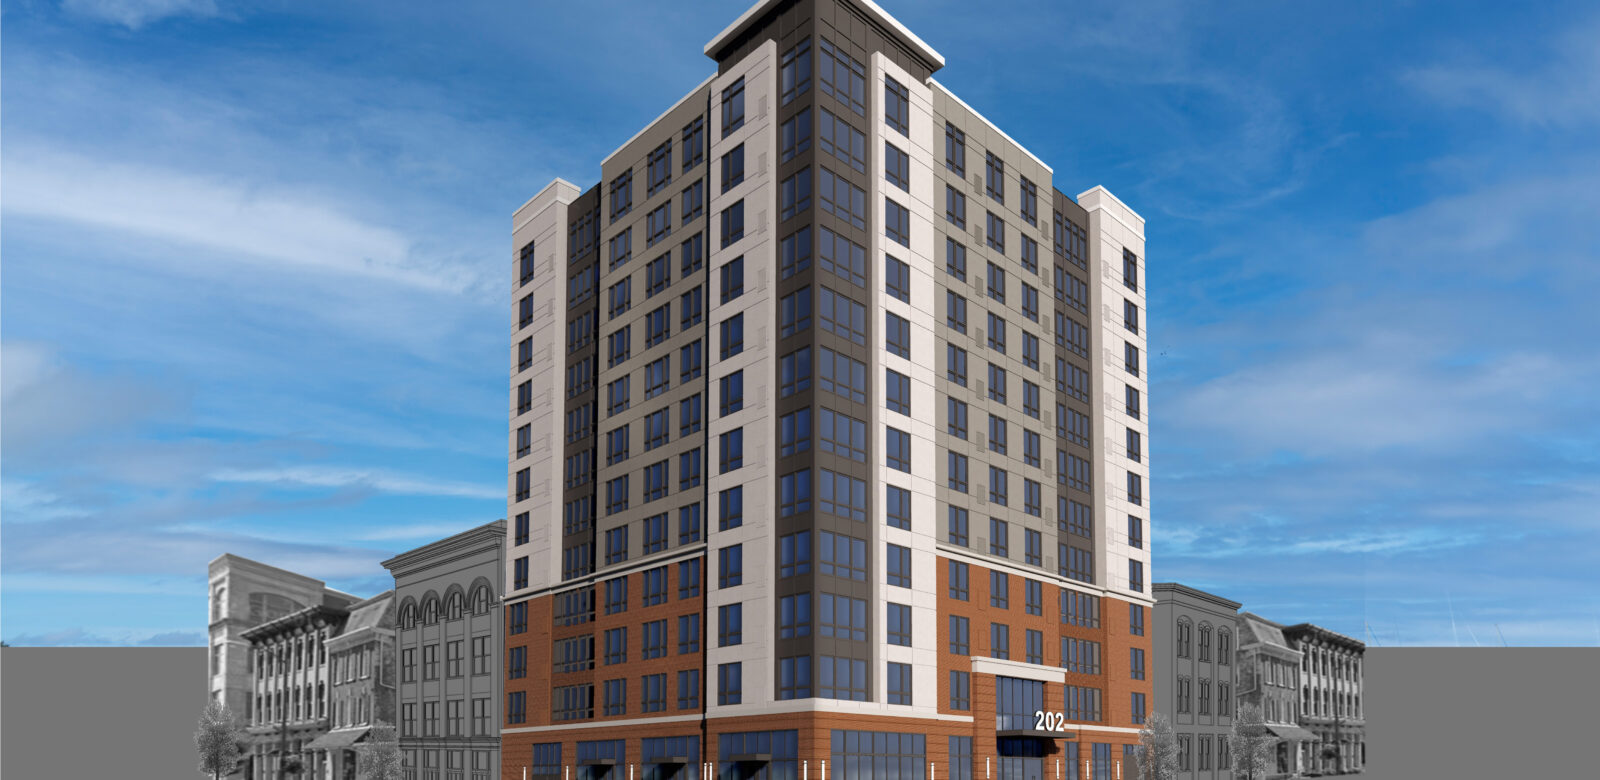 Rendering of a twelve story multi-family apartment